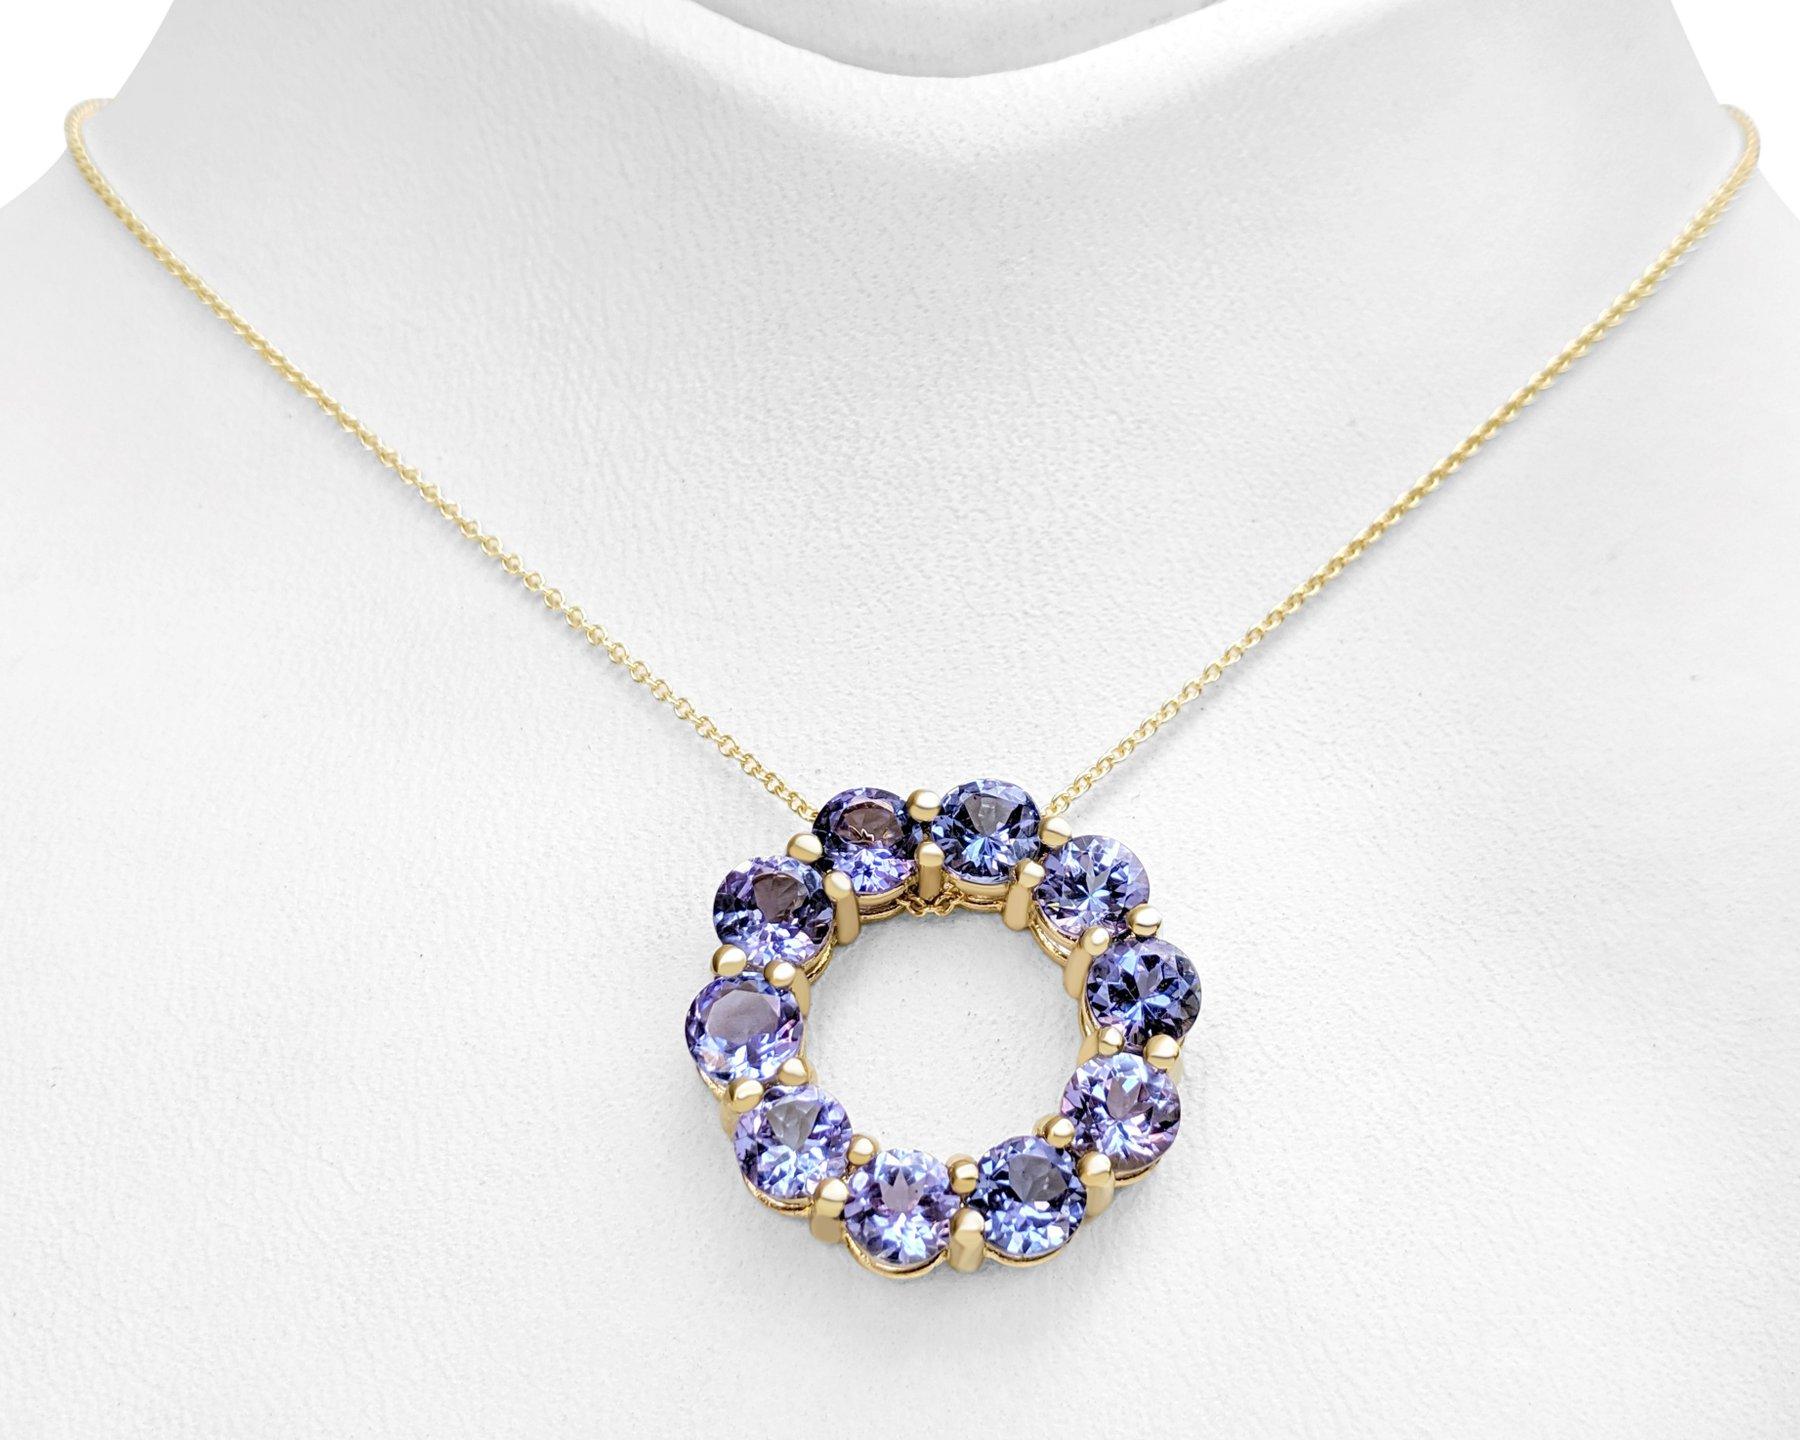 Women's NO RESERVE! 5.01 Carat Tanzanite Circle - 14 kt. Yellow Gold - Pendant Necklace For Sale